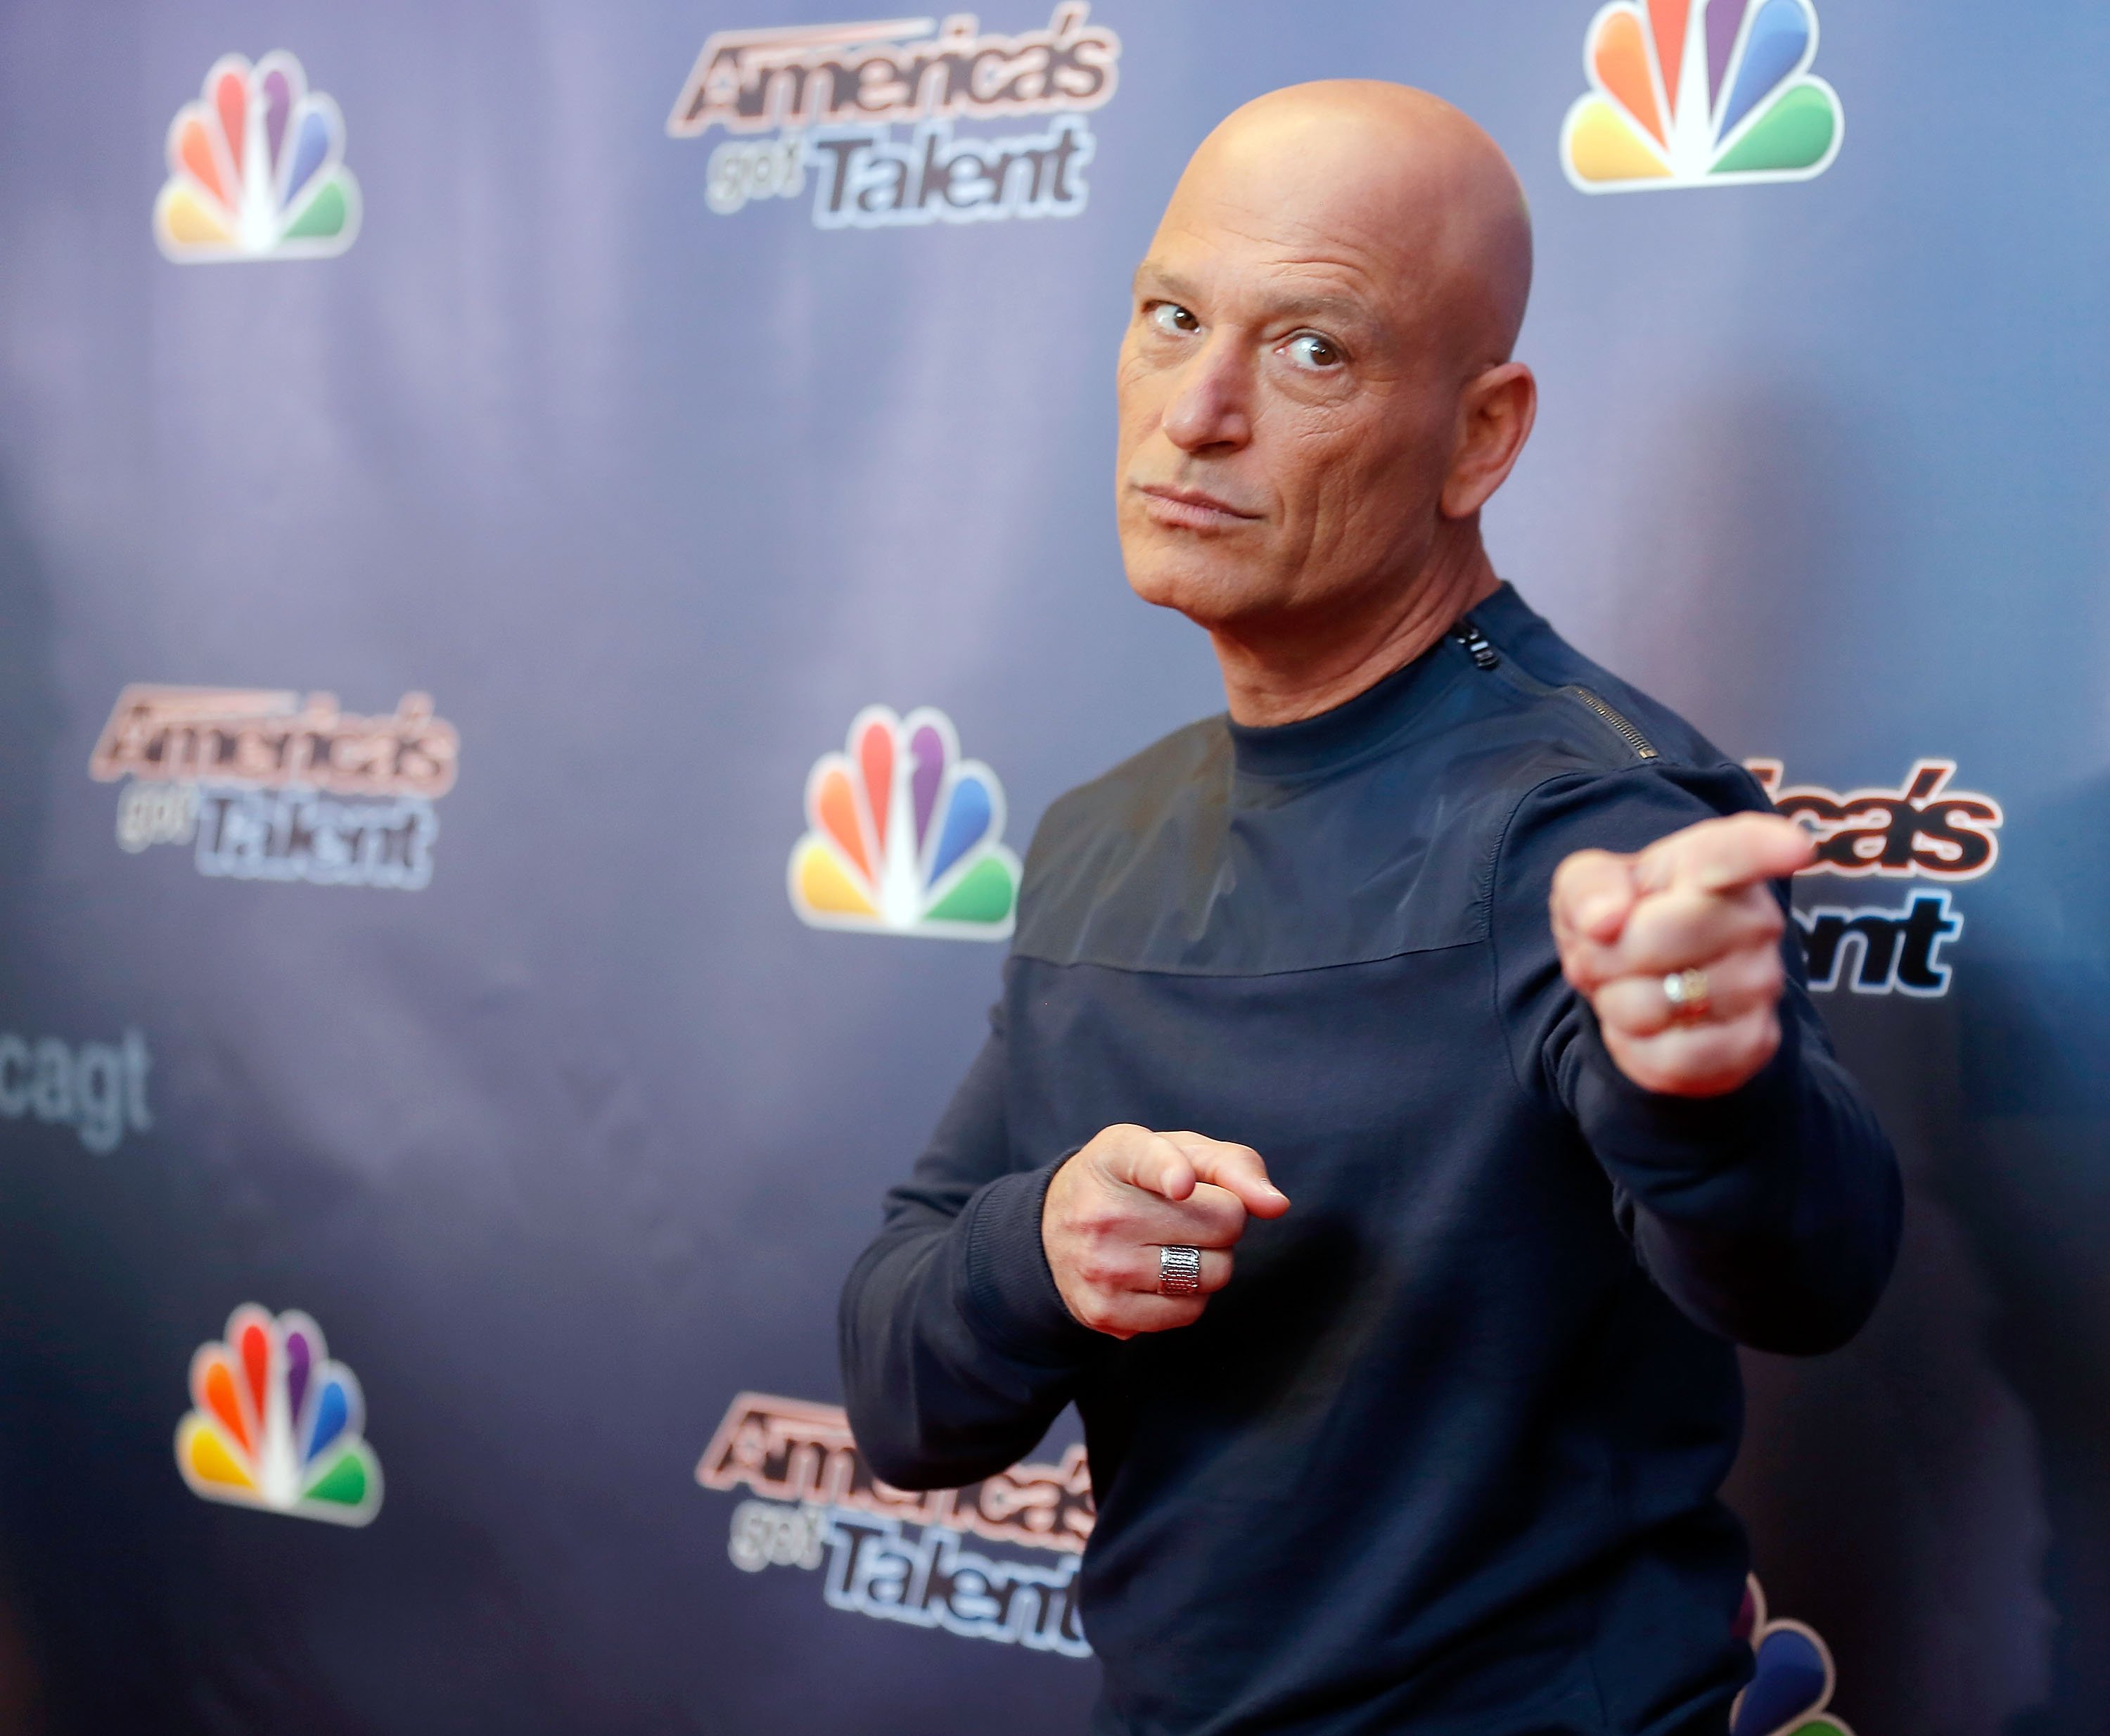 Howie Mandel on April 4, 2014 in New York City | Photo: Getty Images